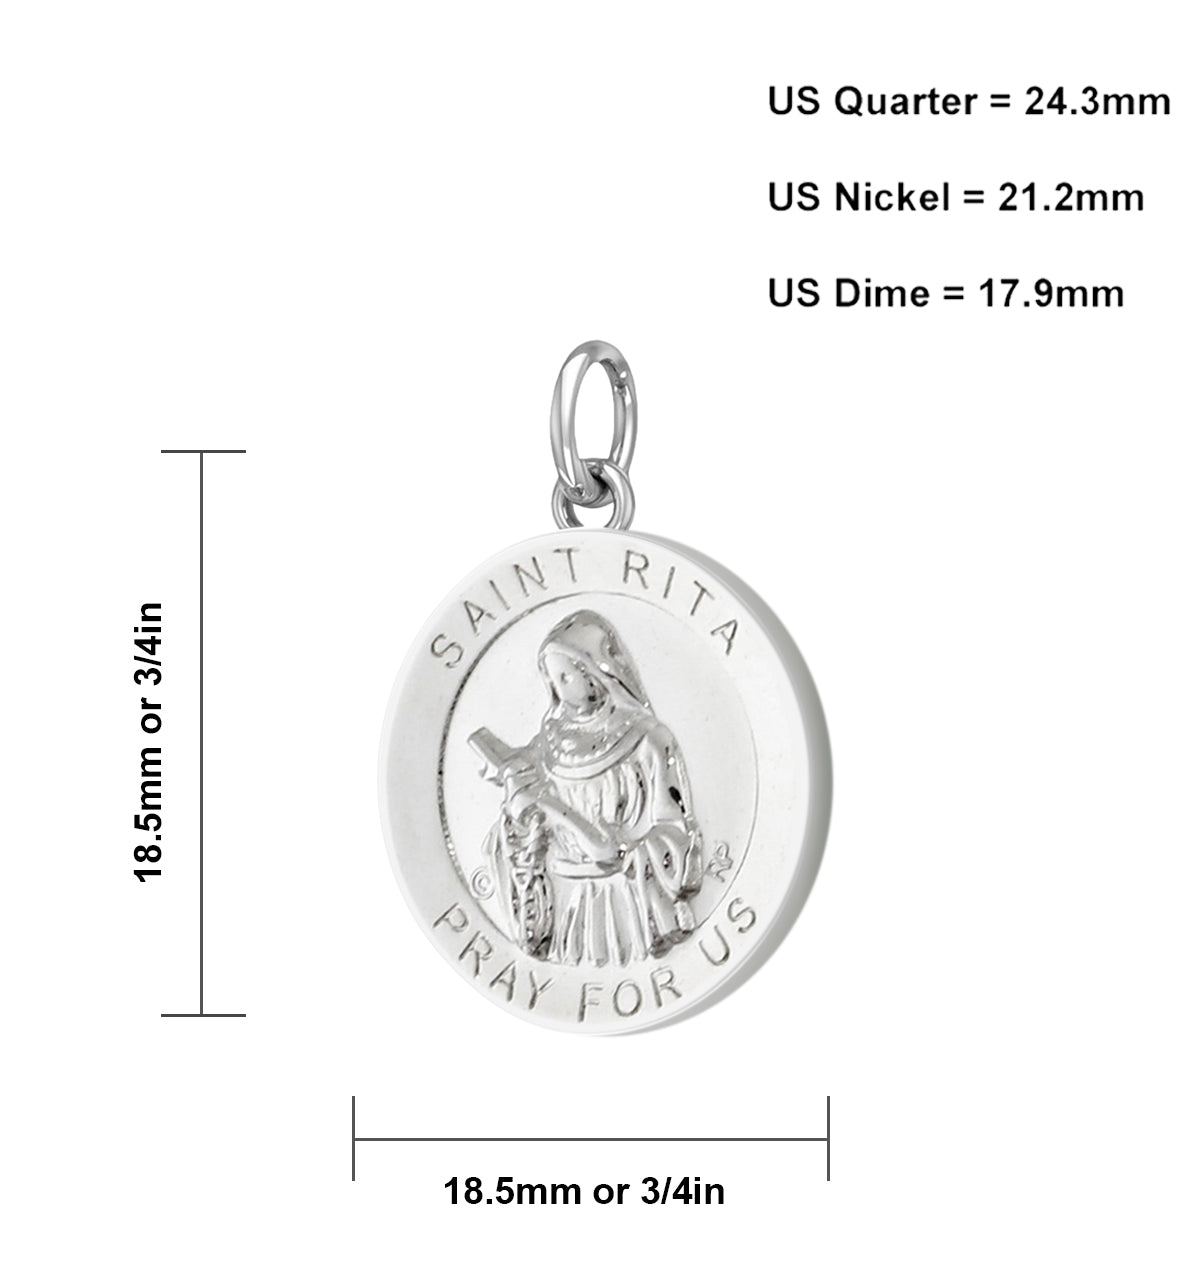 Ladies 925 Sterling Silver 18.5mm Polished Saint Rita Medal Pendant Necklace - US Jewels